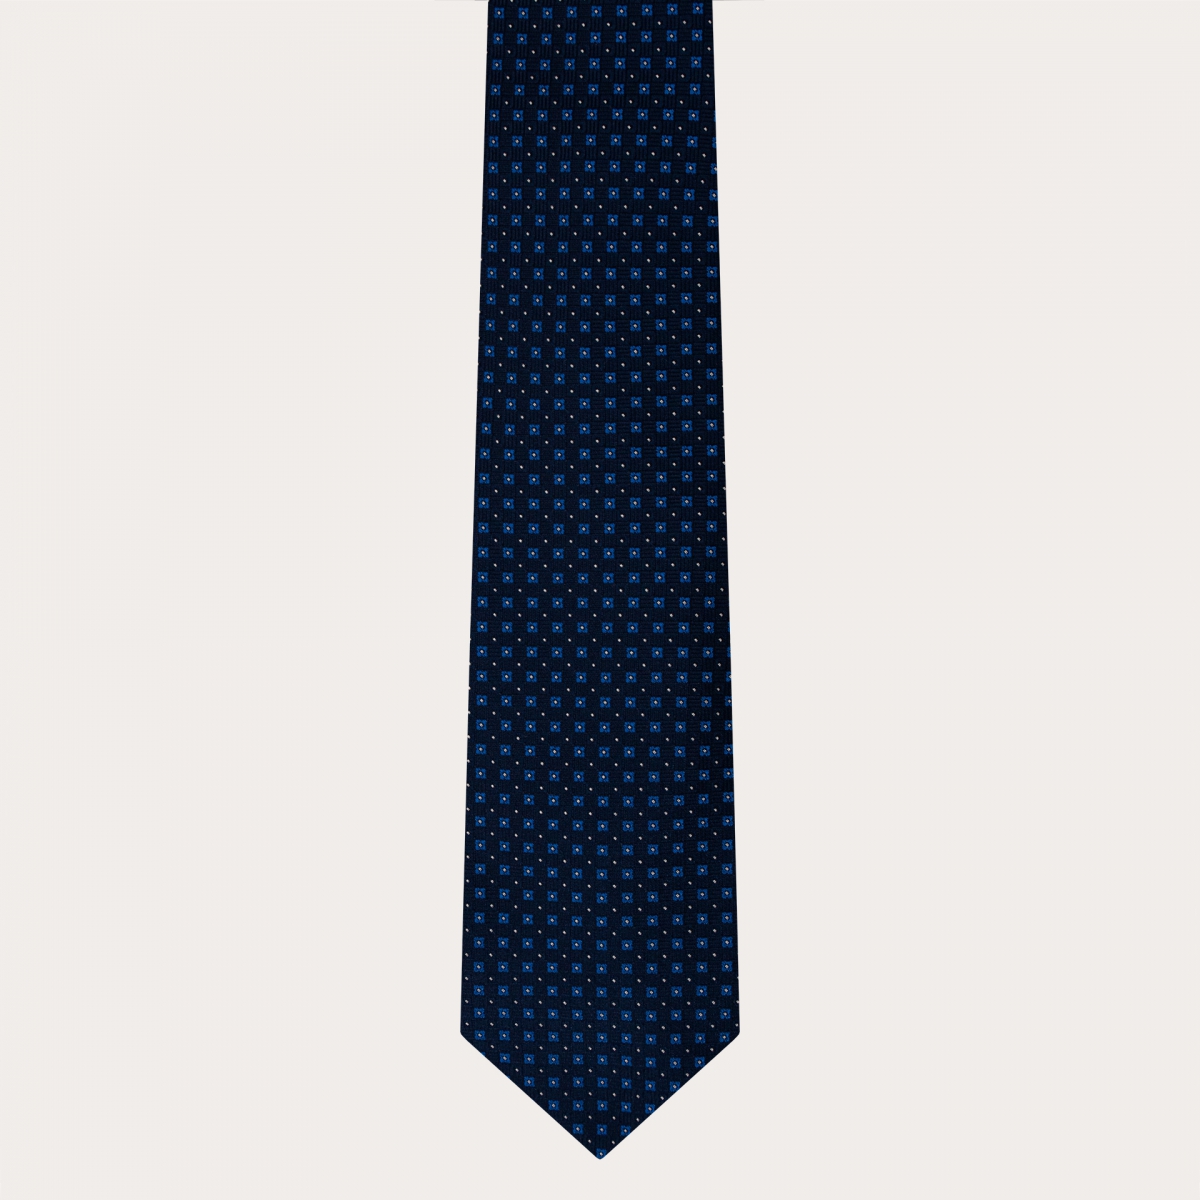 BRUCLE Elegant necktie in jacquard silk, blue with floral micropattern